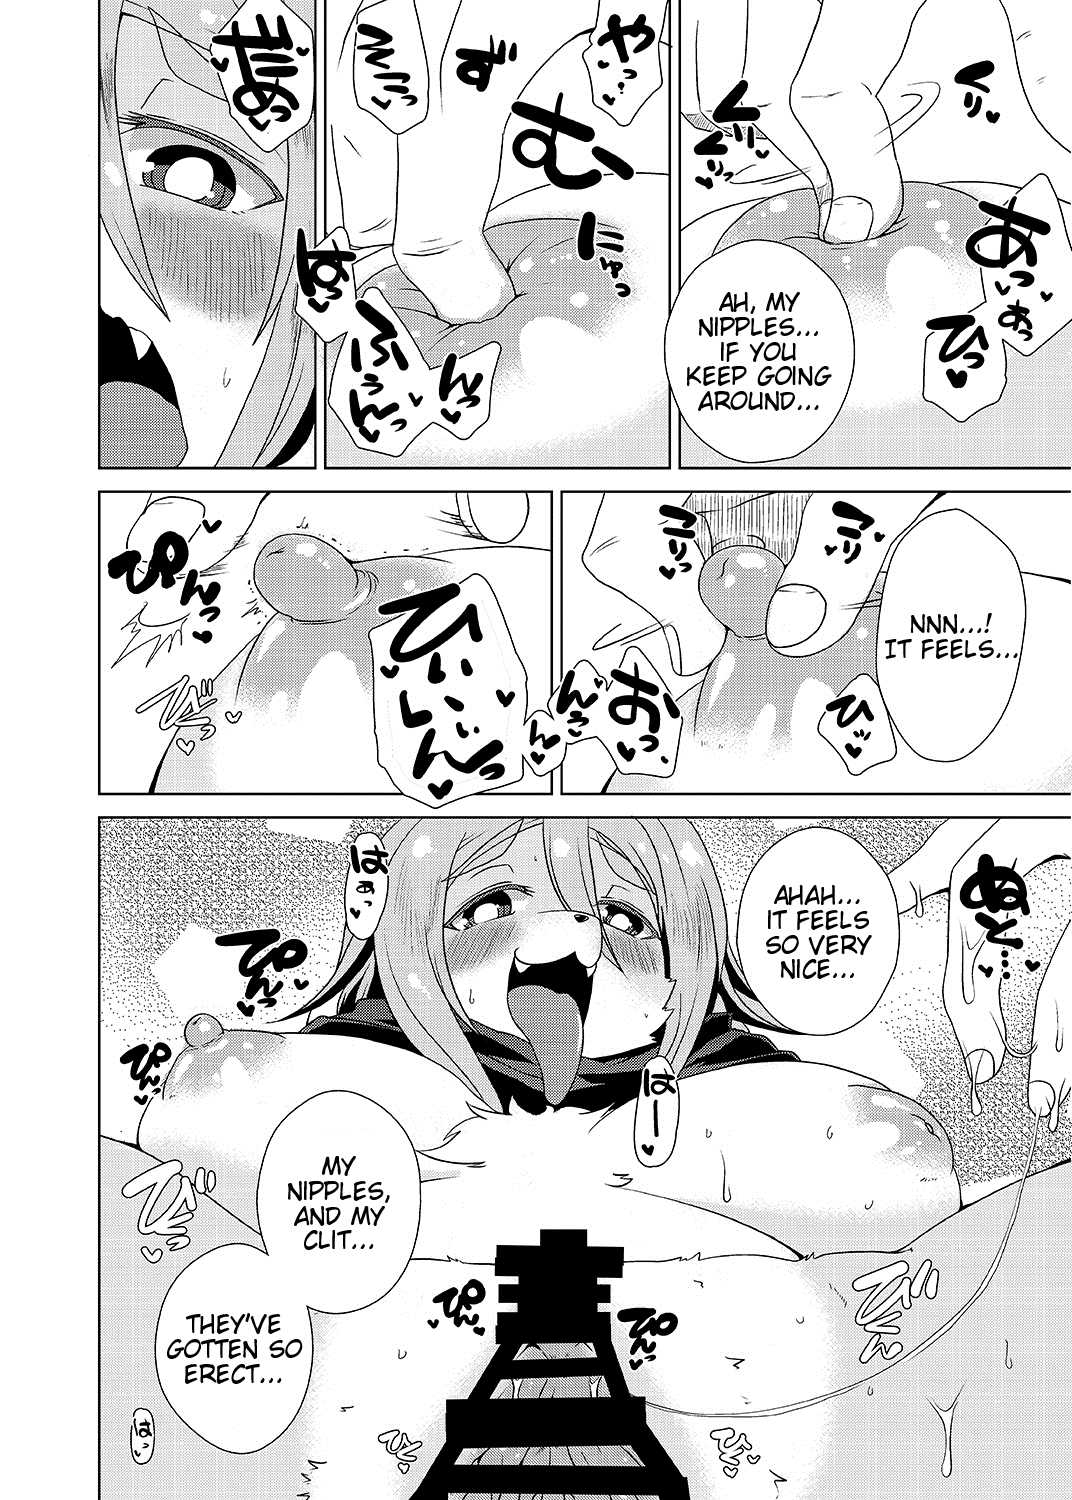 Reading Furry Mother In Law Original Hentai By Shinobe 1 Furry Mother In Law [oneshot